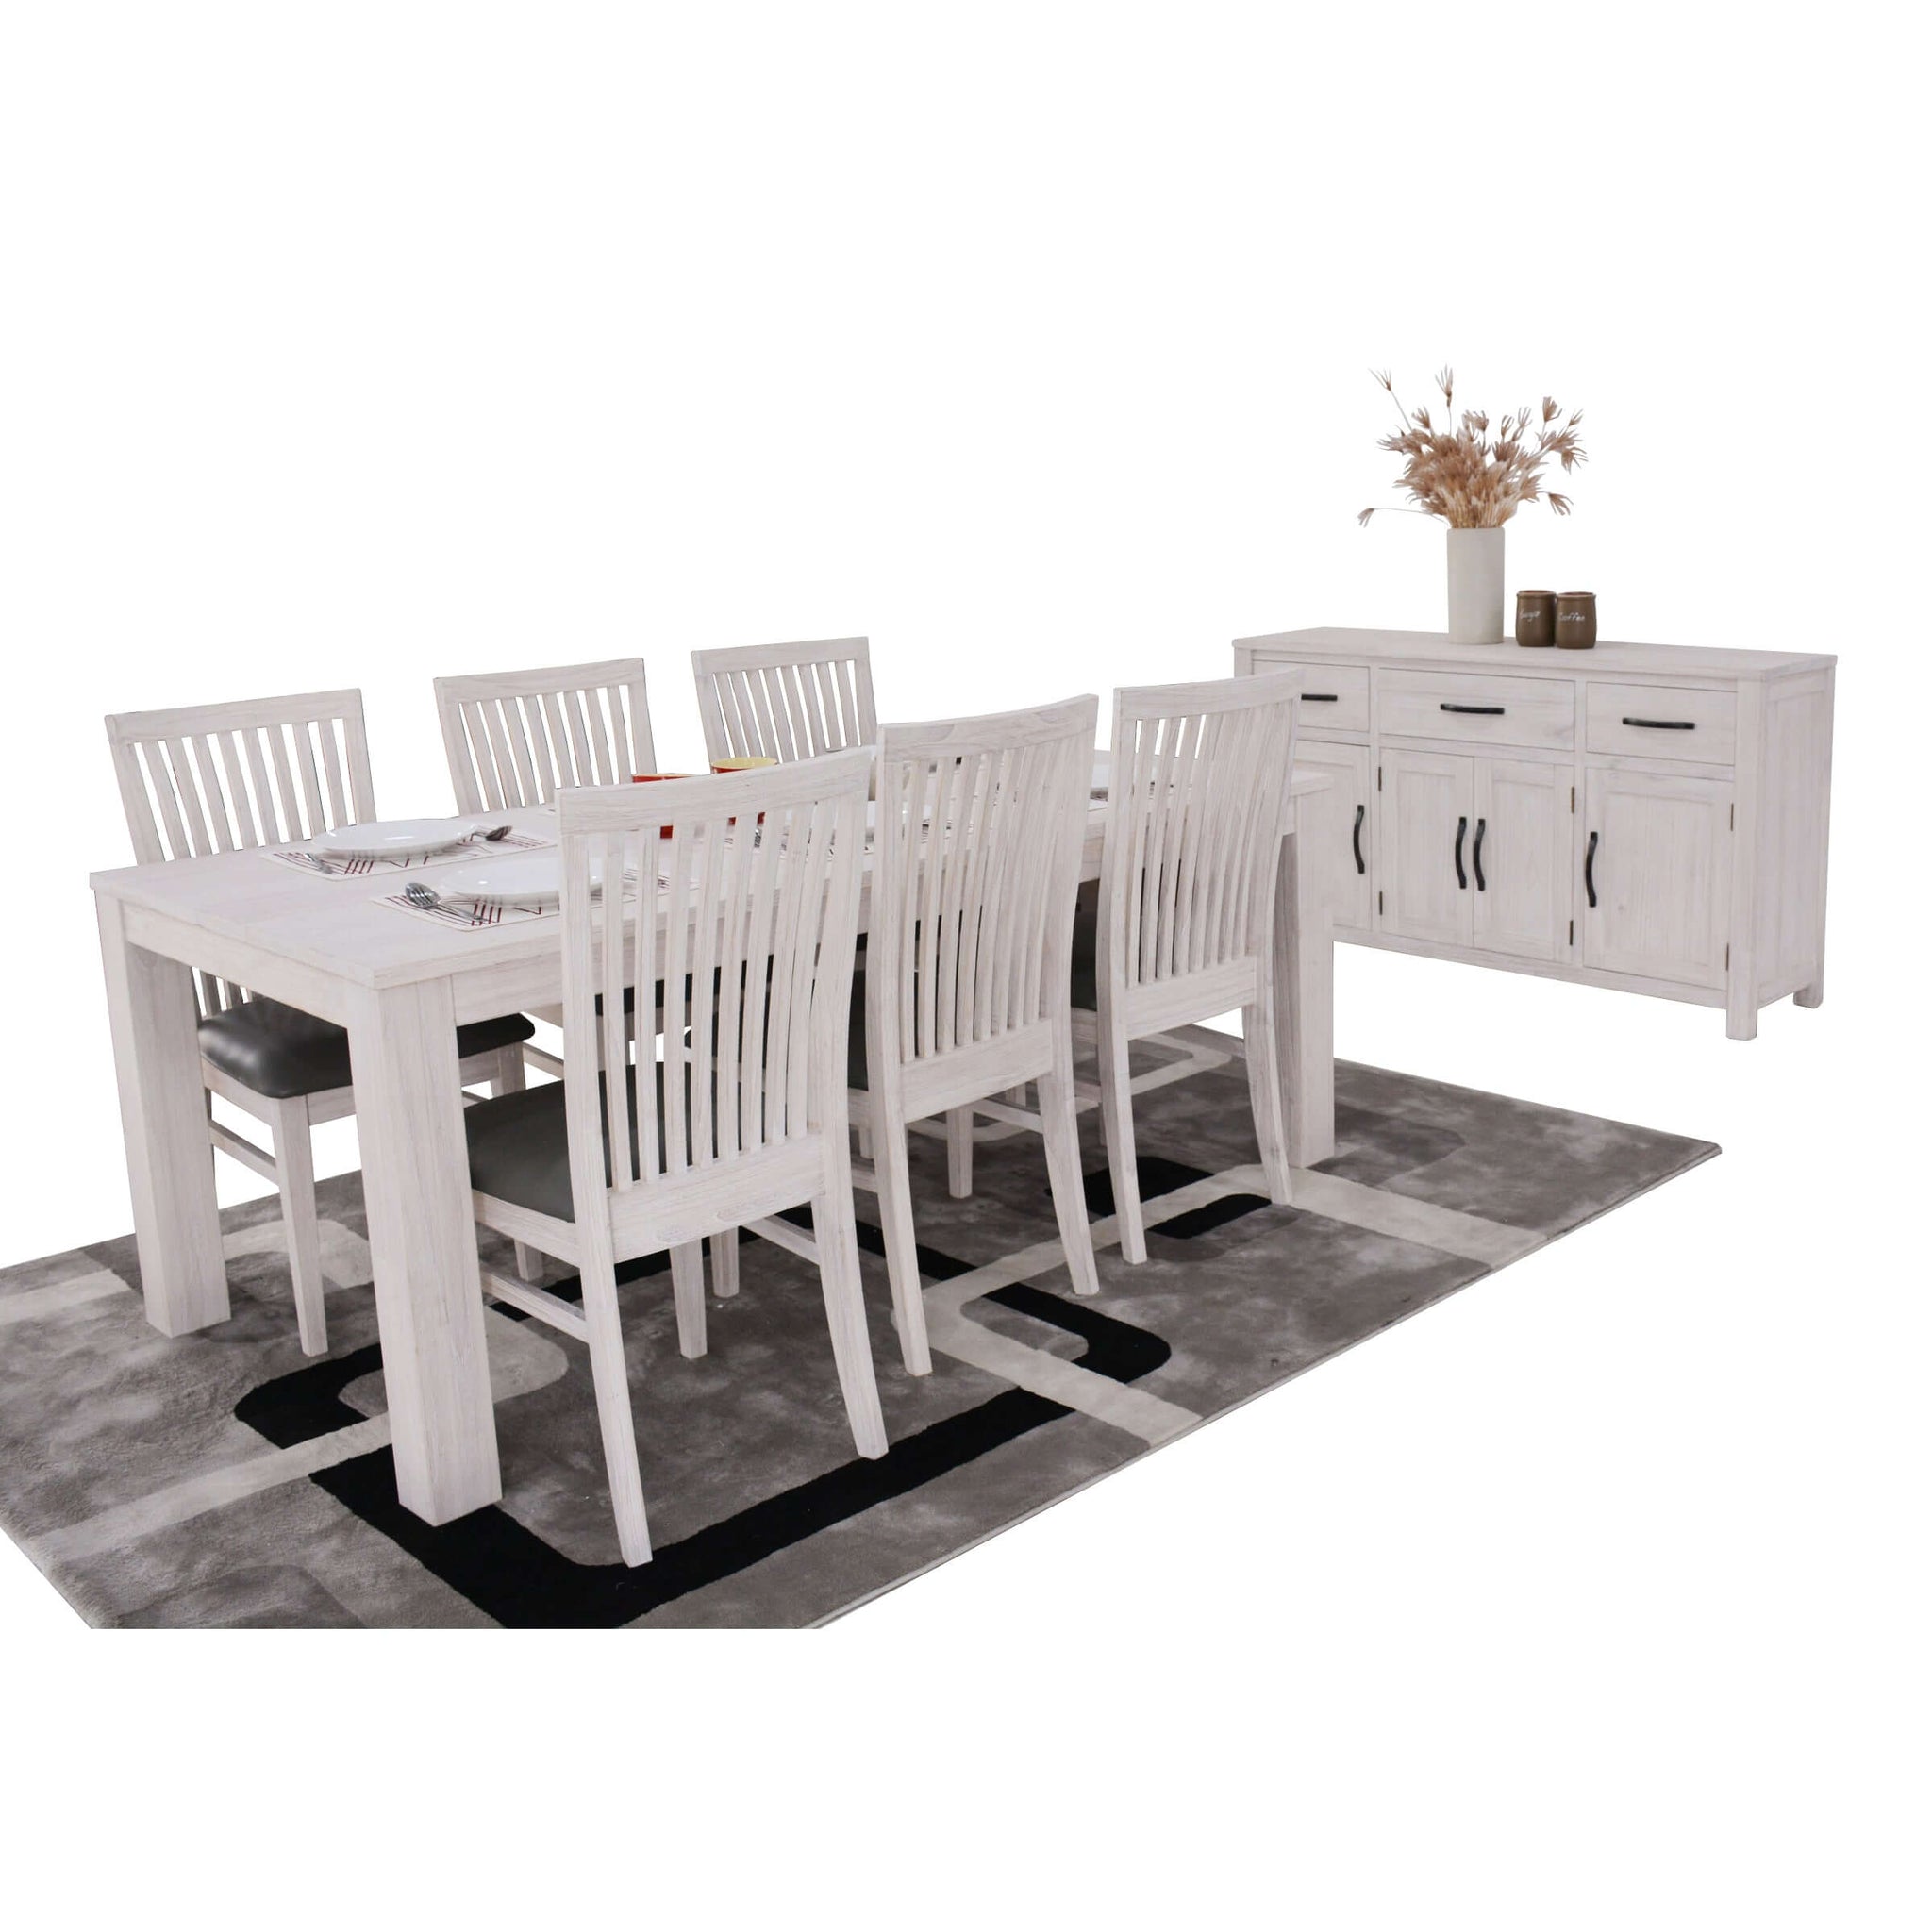 Foxglove Dining Table 190cm Solid Mt Ash Wood Home Dinner Furniture - White-Upinteriors